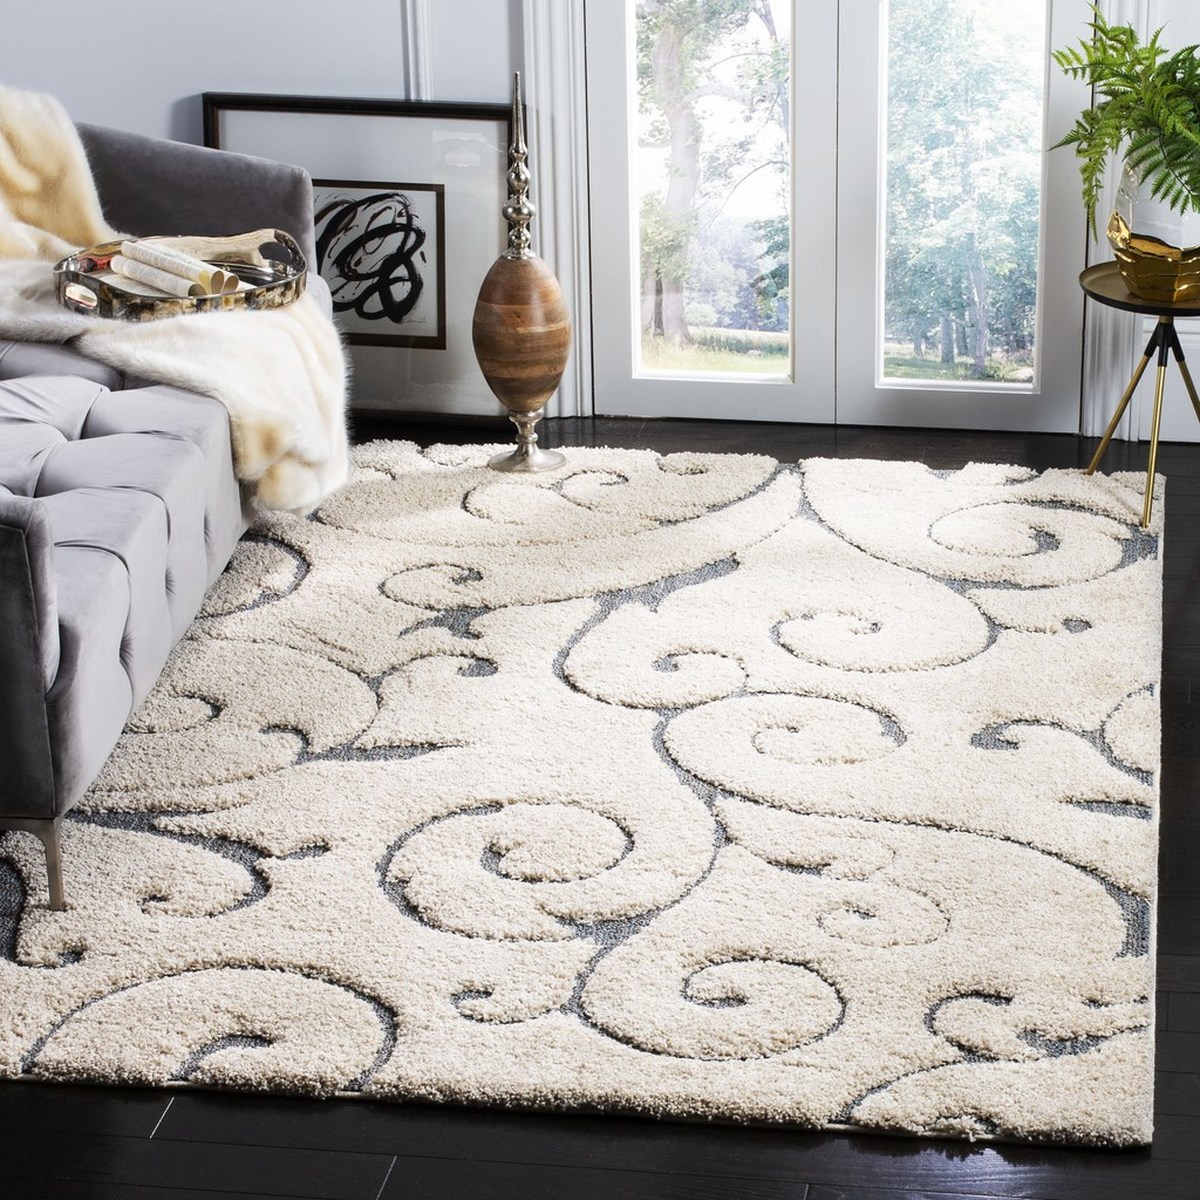 Sg455-1155-3 Florida Shag Power Loomed Small Rectangle Area Rug, Cream & Light Blue - 3 Ft.-3 In. X 5 Ft.-3 In.